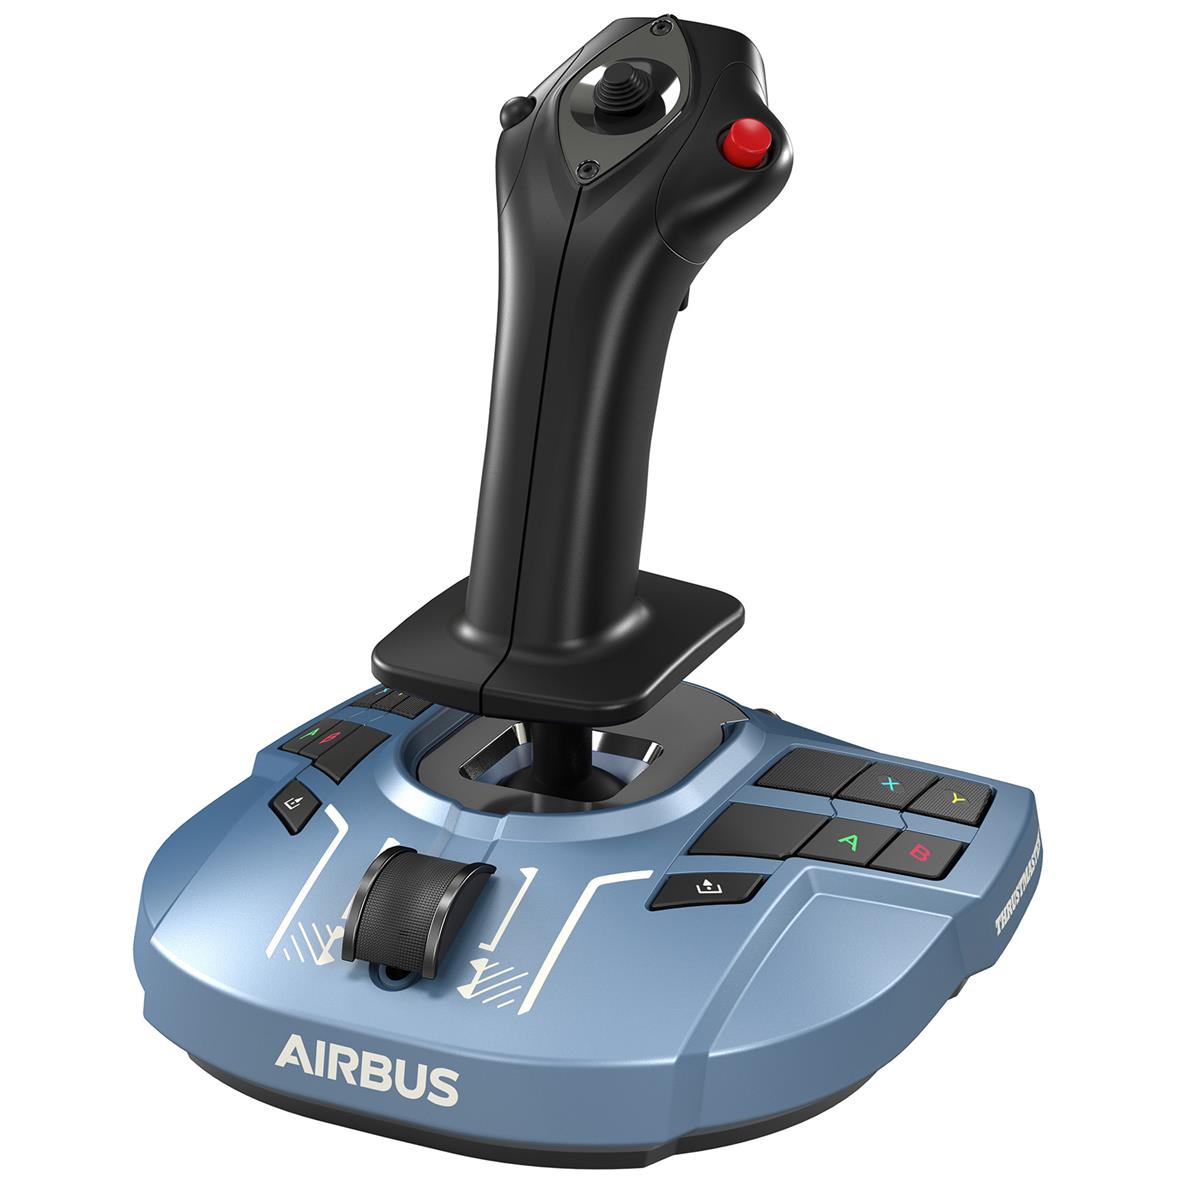 Image of Thrustmaster TCA Sidestick Airbus Edition Joystick for Xbox X|S